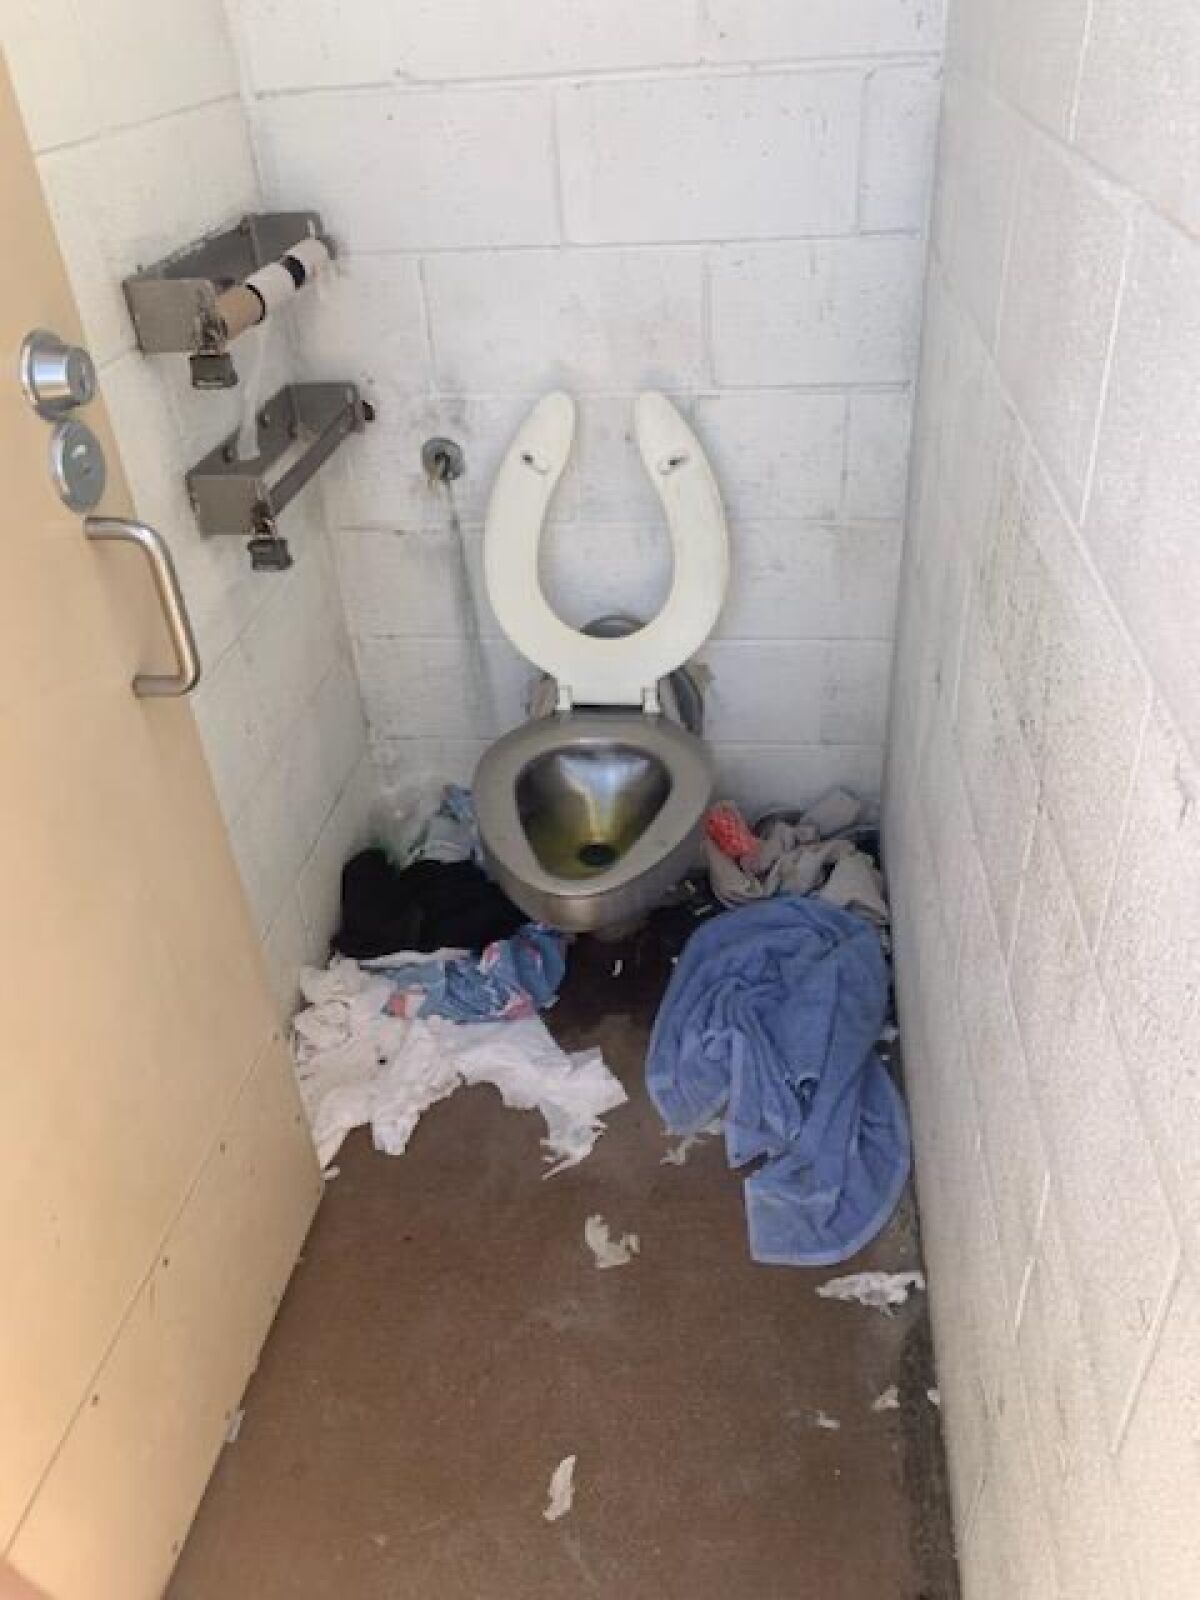 This photo of a messy stall was taken in April at the south restroom facility at La Jolla Shores' Kellogg Park.